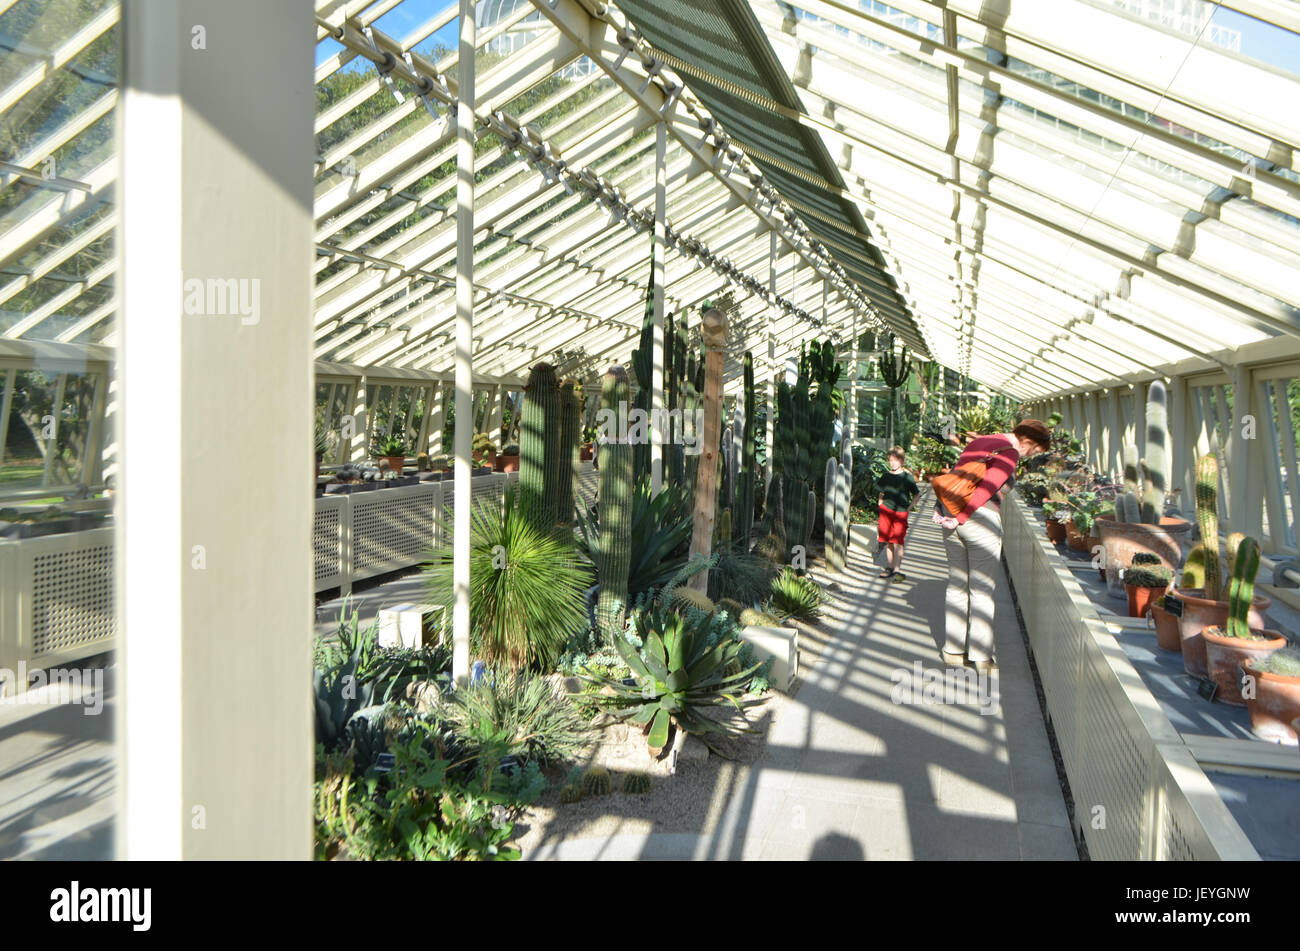 Inside a Greenhouse at The National Botanic Gardens in Dublin, Ireland Stock Photo